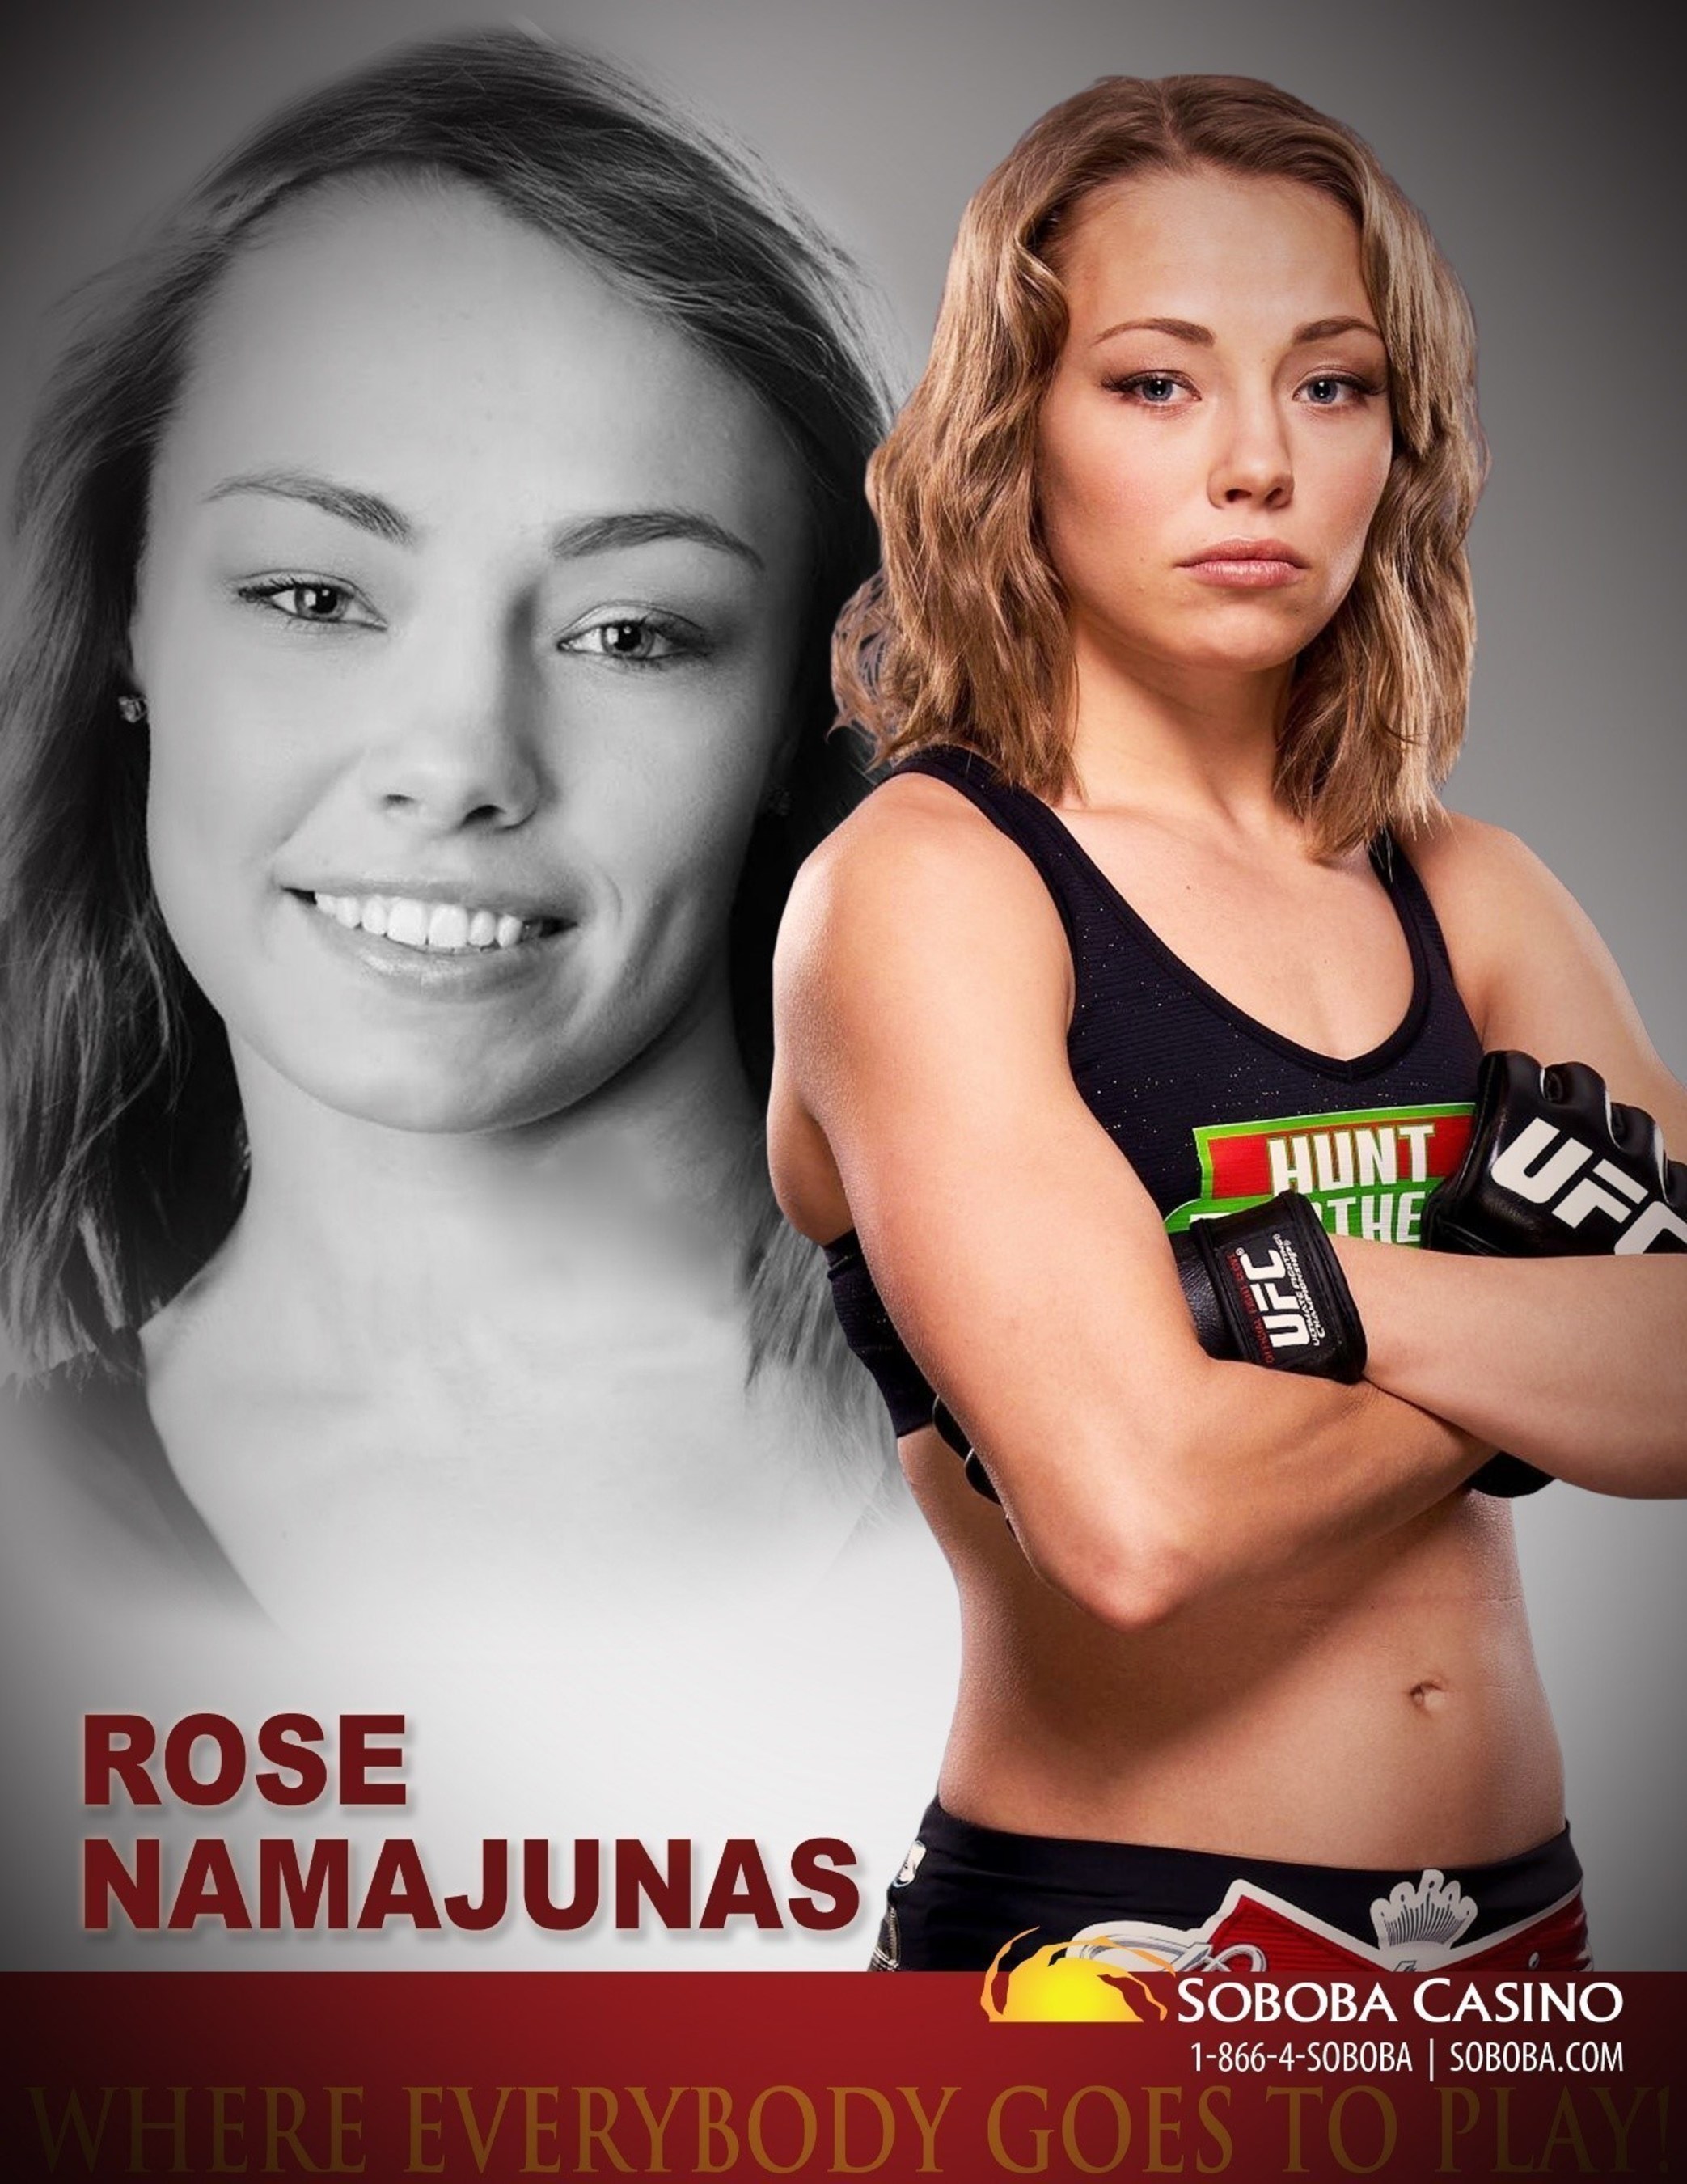 Rose Namajunas Coming to Soboba Casino for Rousey VS Holm